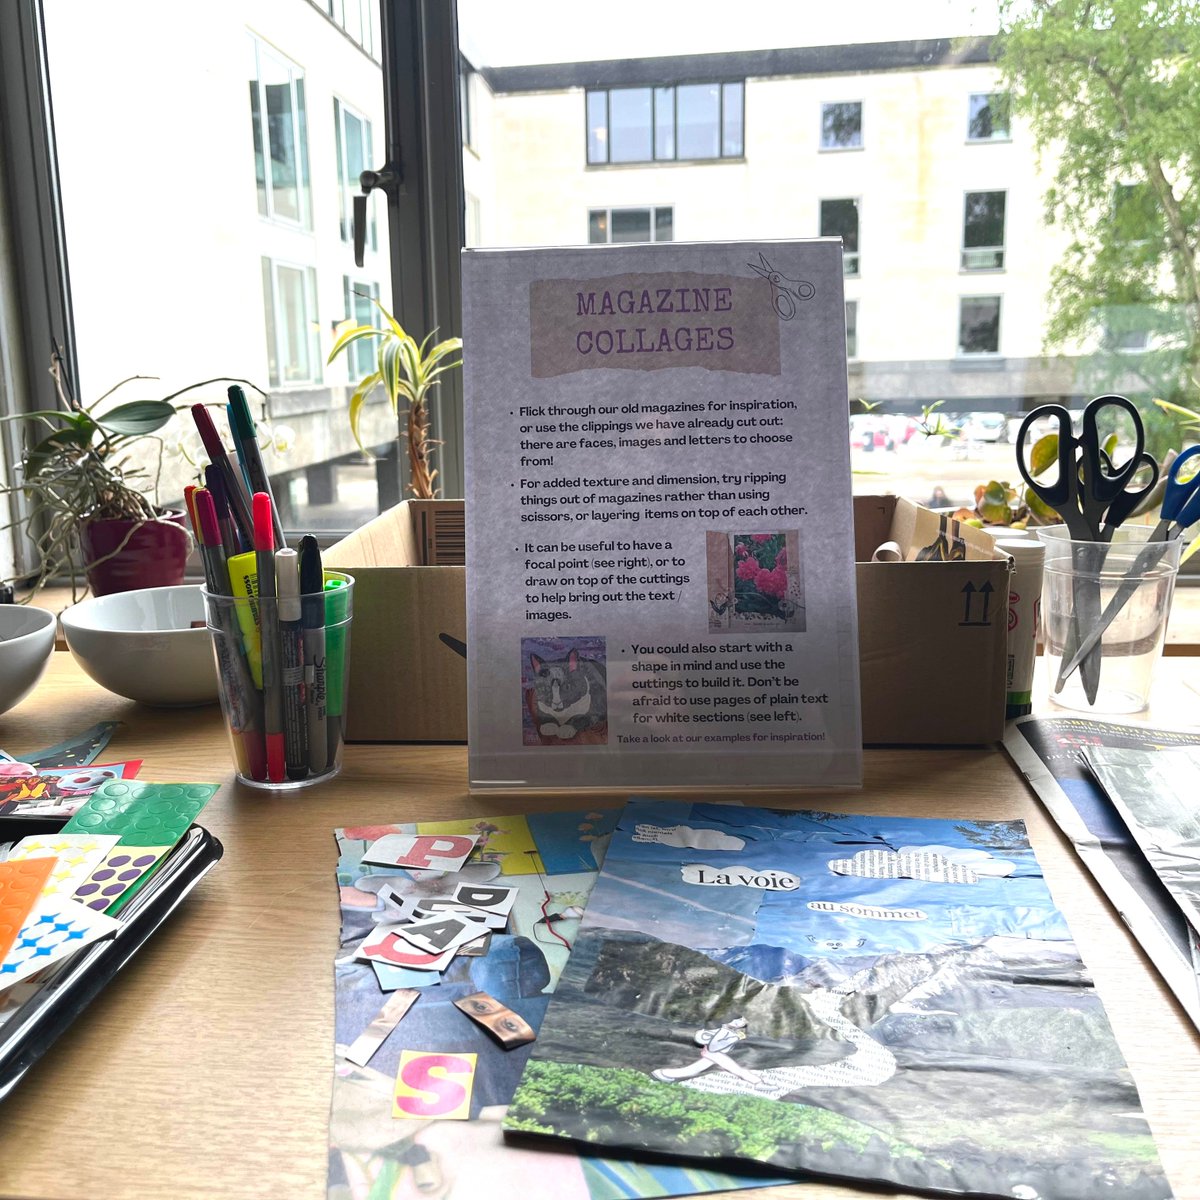 This #MentalHealthAwarenessWeek take some time out from revision with these wonderful craft activities at @MMLL_Library. Make a collage, try some origami or do some soothing colouring in! The MMLL Library is open Mon-Fri, 9am-7pm during Easter Term and 11am-5pm on Saturdays.